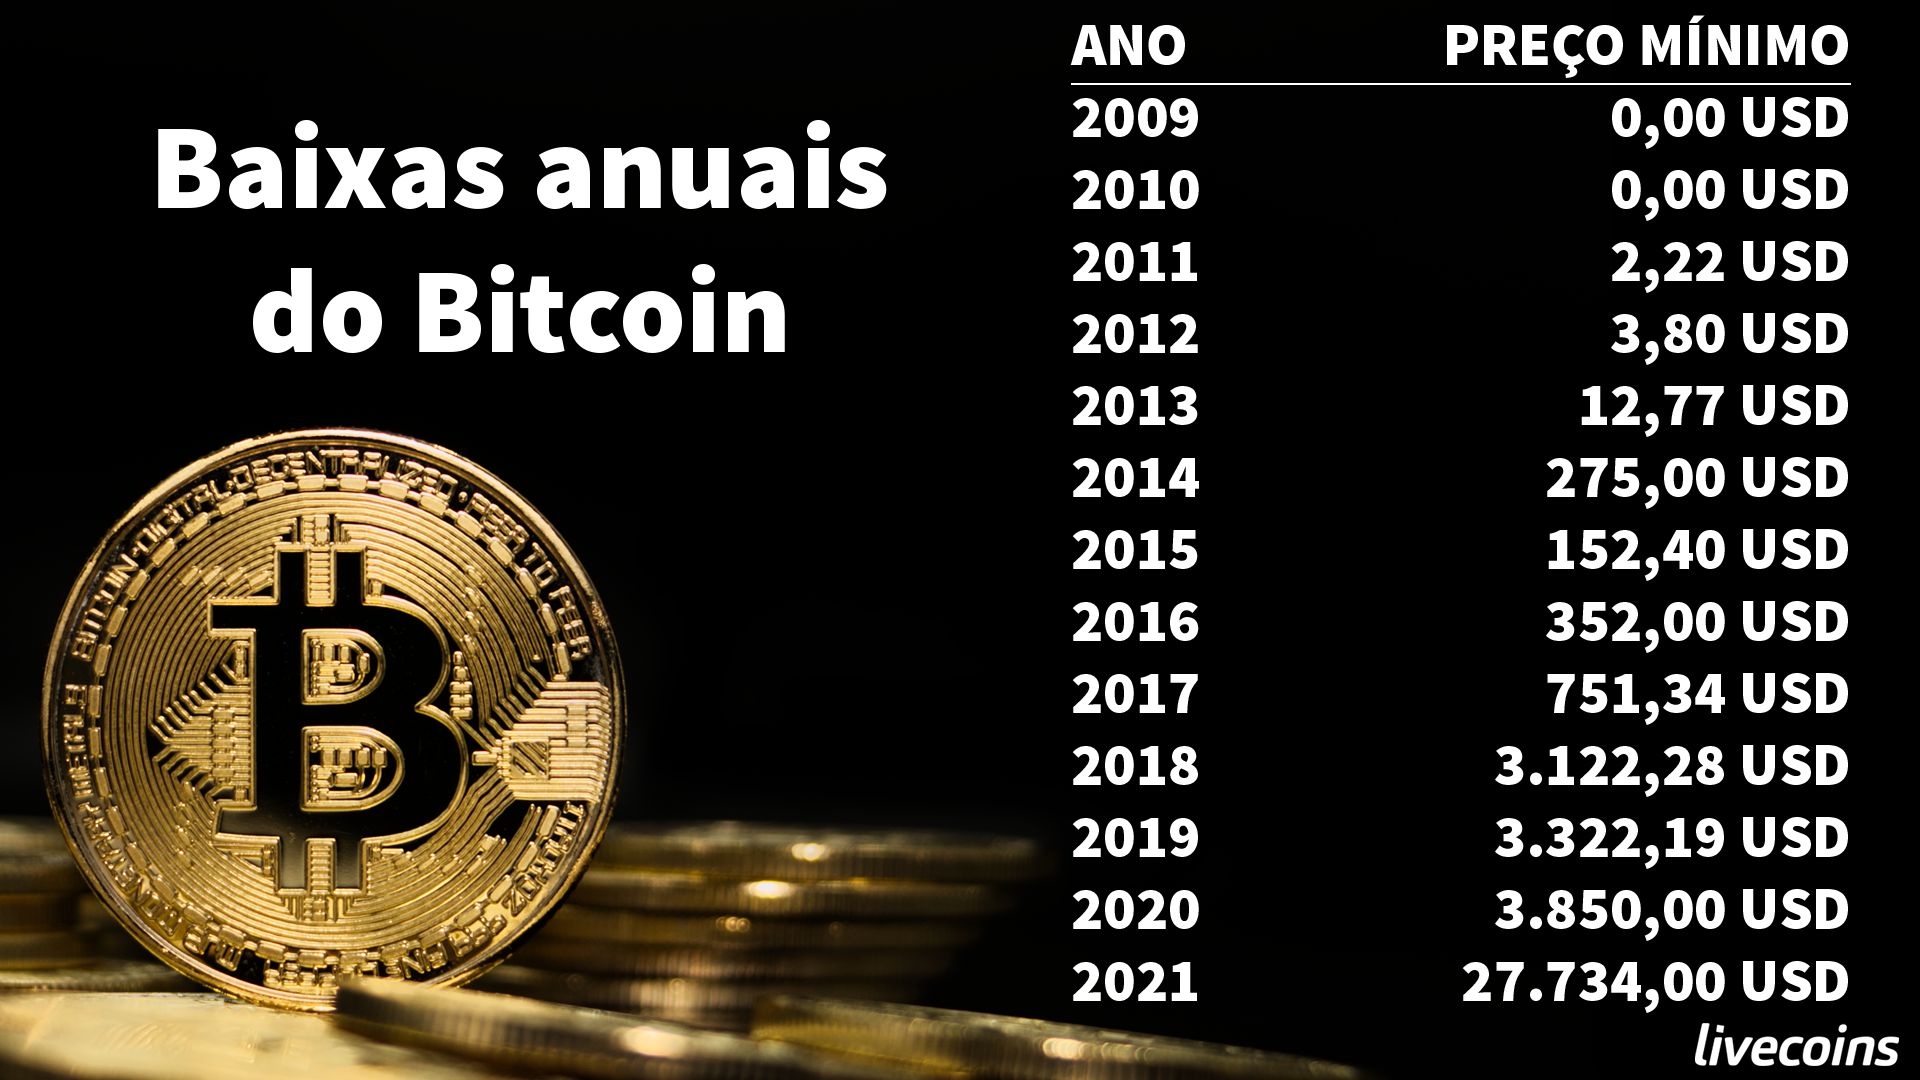 Bitcoin annual minimum price grew 720% in 2021 compared to the previous year